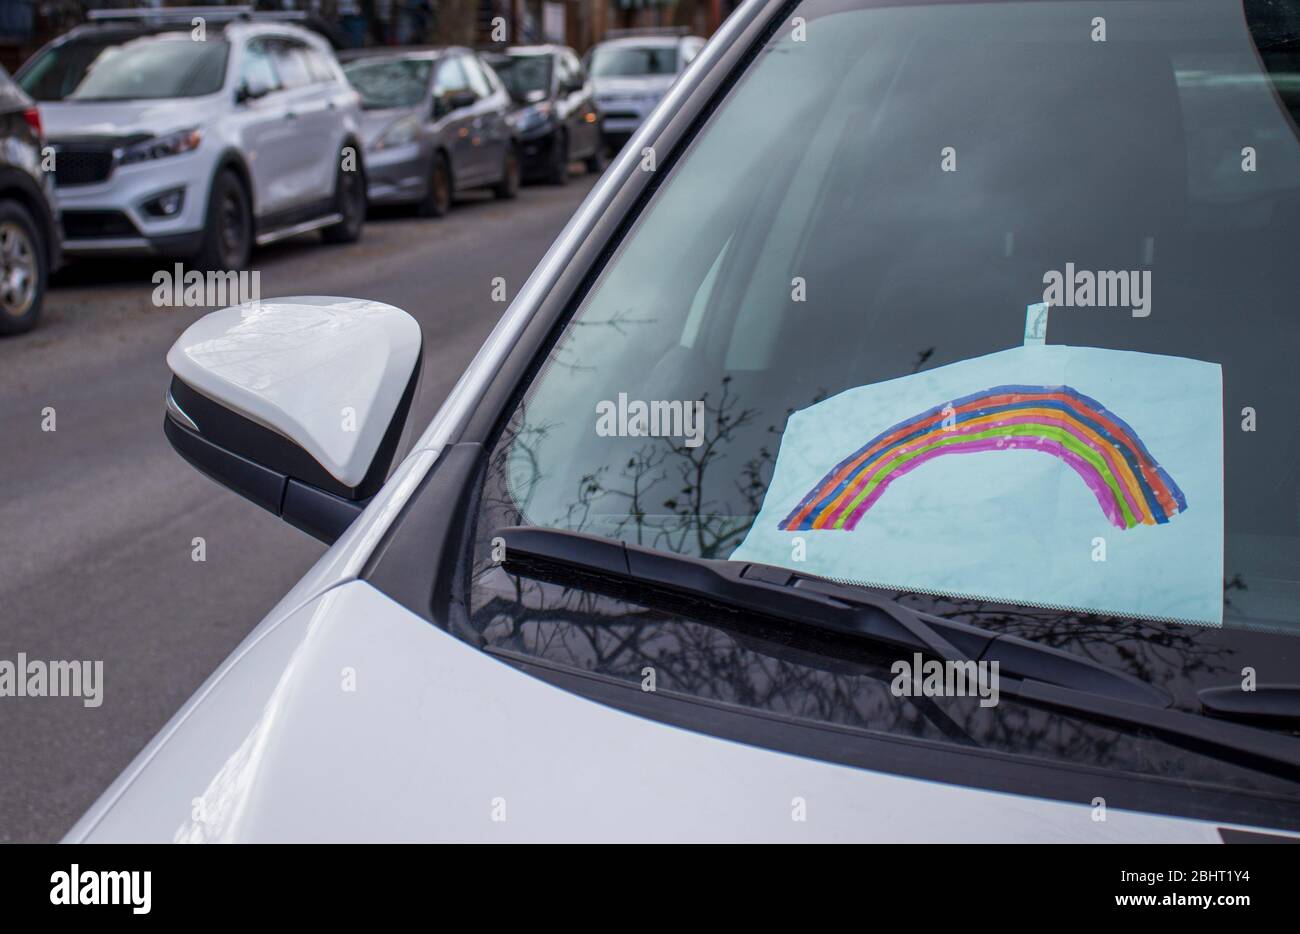 April 16, 2020 - Montreal, Qc, Canada: Rainbow Drawing sticked on a car window dashboard during Coronavirus COVID-19 Pandemic Stock Photo